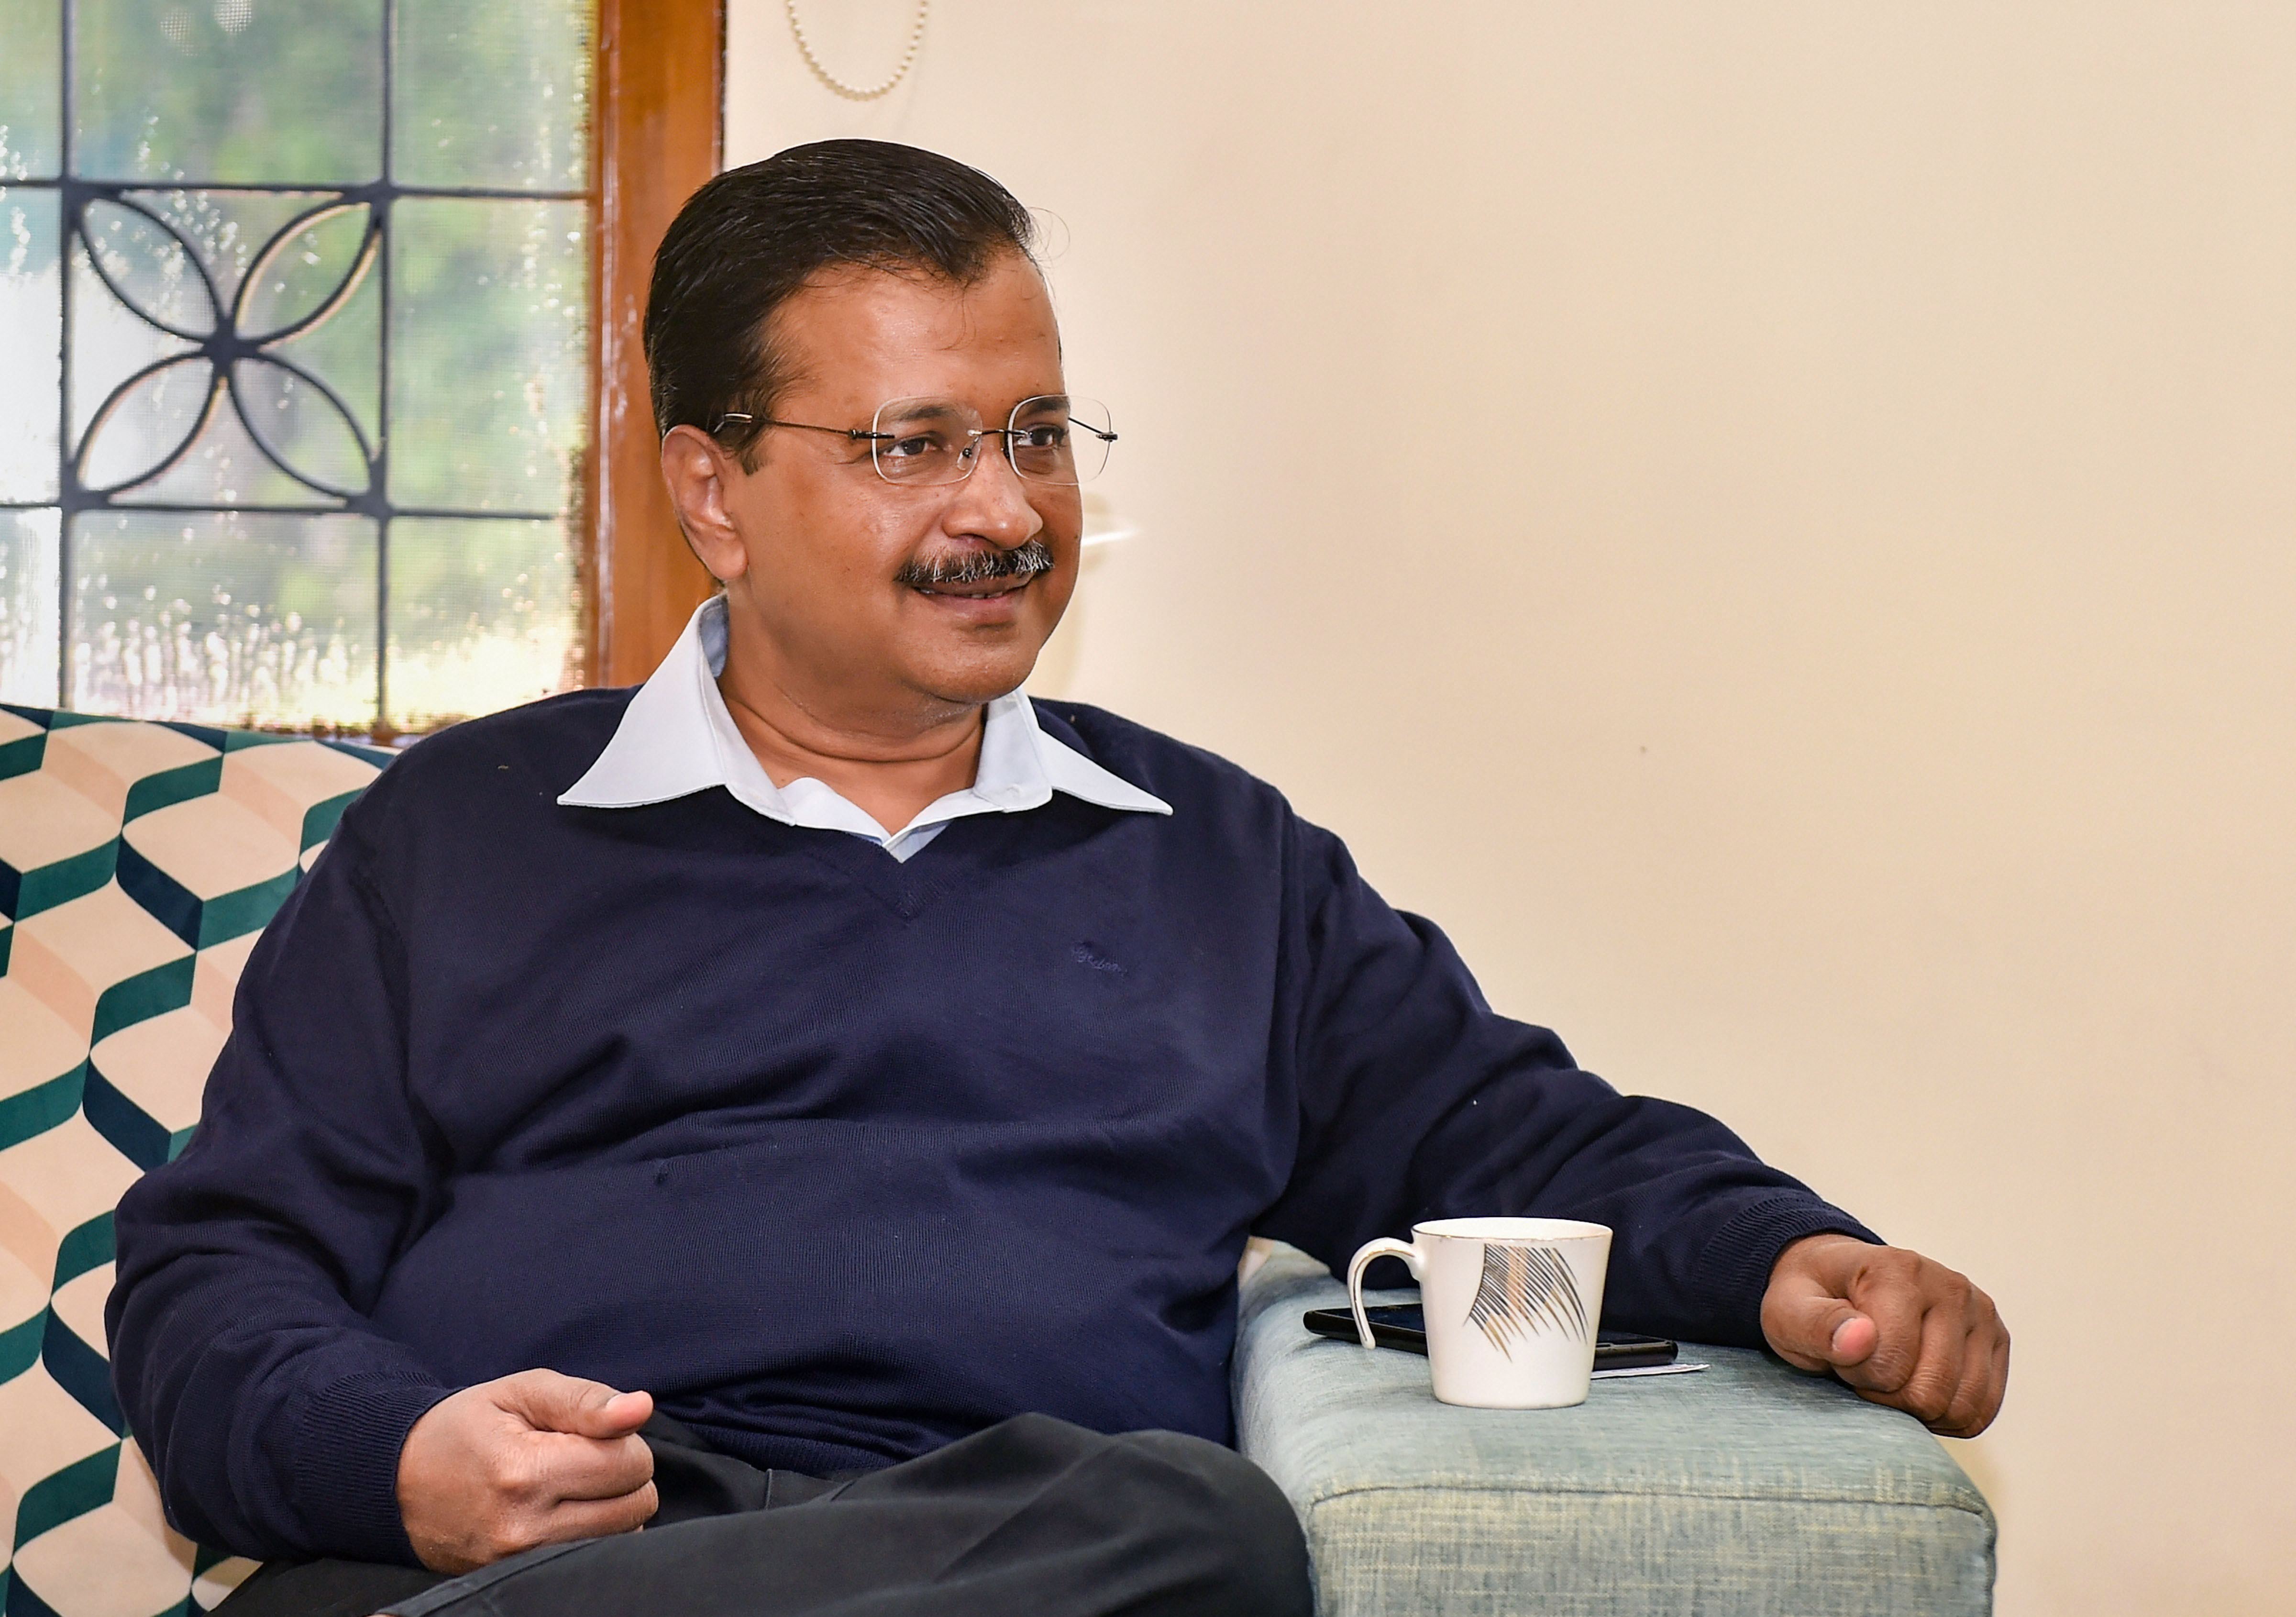 Delhi chief minister and Aam Aadmi Party (AAP) president Arvind Kejriwal during an interview with PTI, at his residence in New Delhi, Thursday, Febraury 6, 2020
